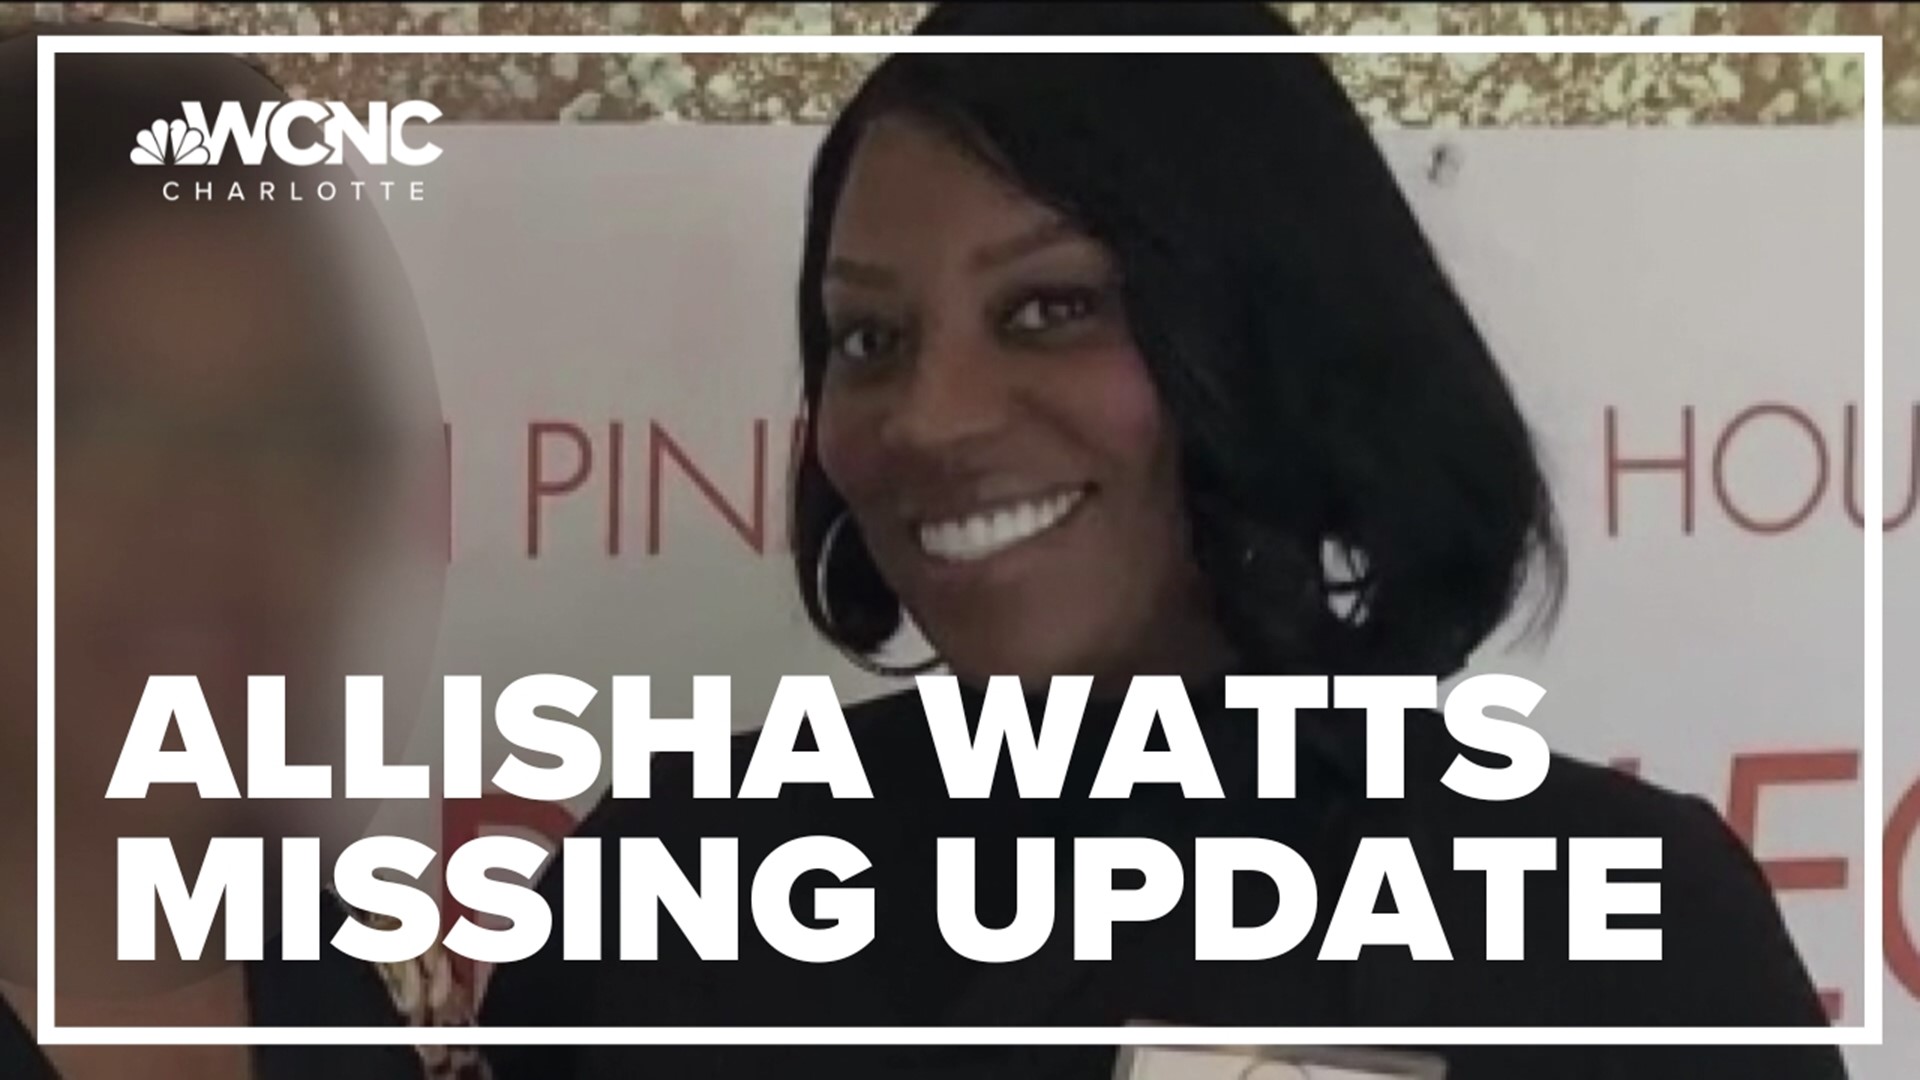 Family and friends of Allisha Watts are demanding answers from police and asking anyone with information about her disappearance to help find her.